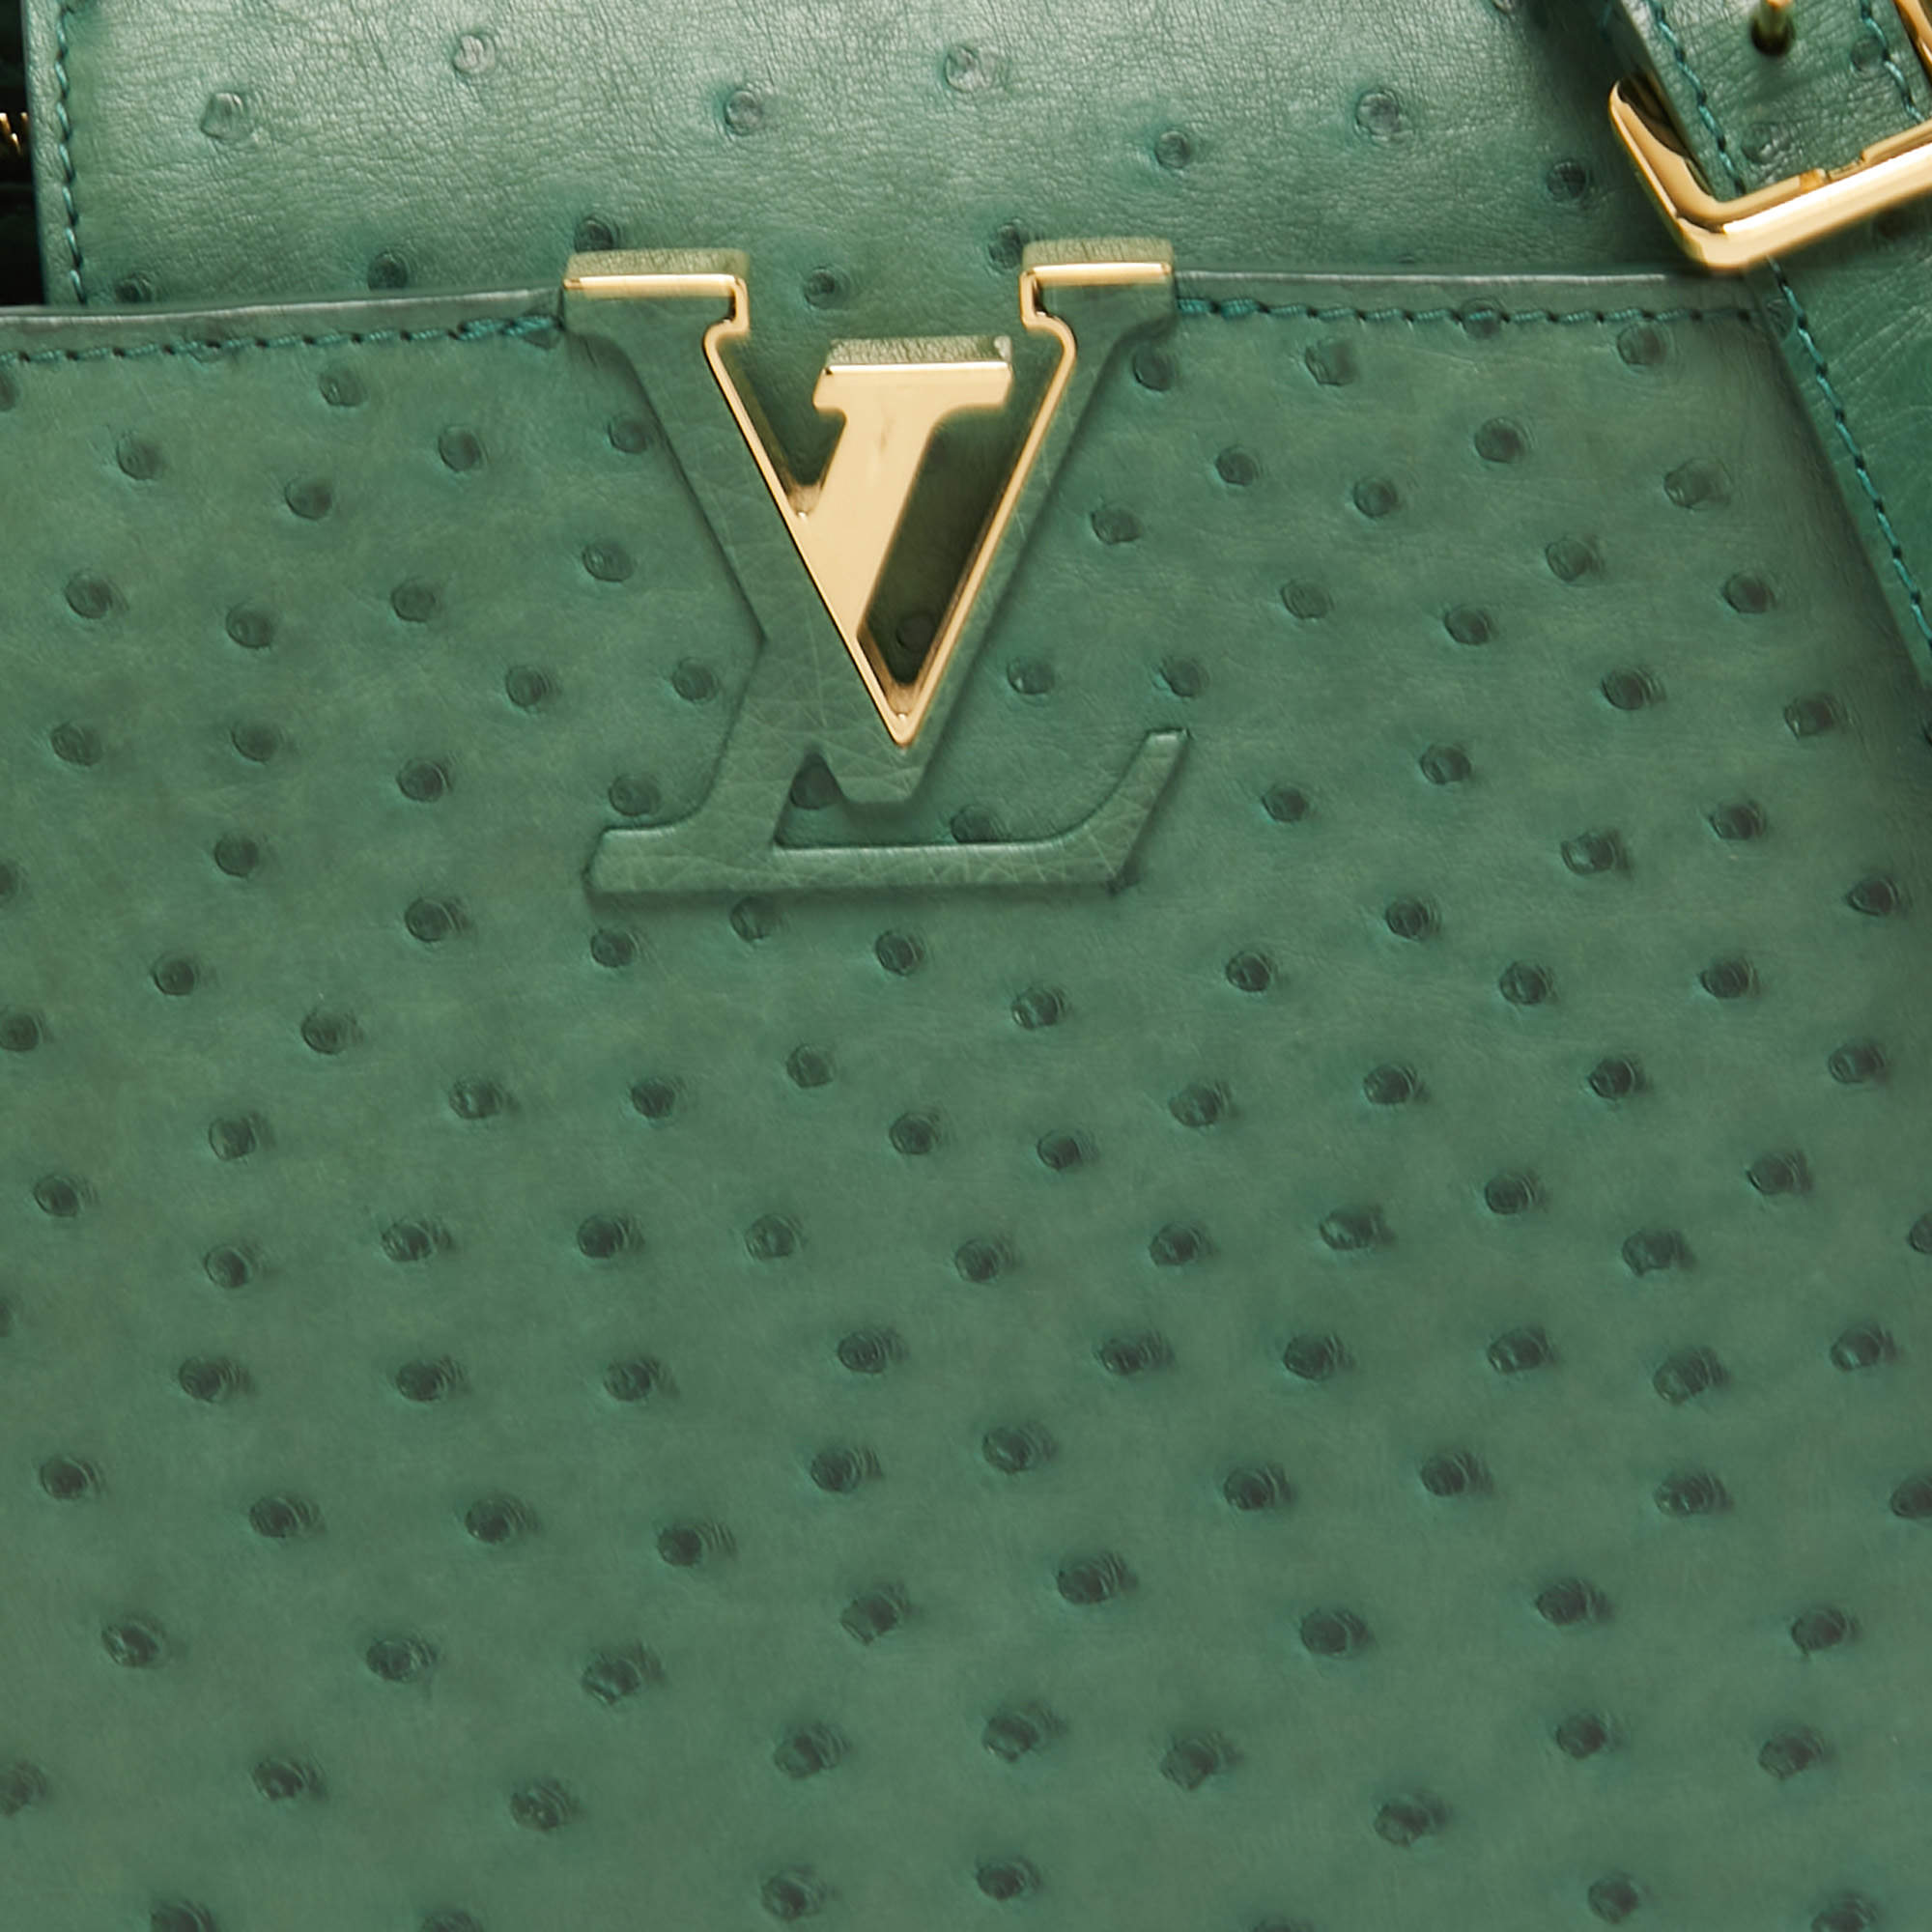 Louis Vuitton Capucines Bags in Ostrich, Python And Crocodile Leathers, Bragmybag